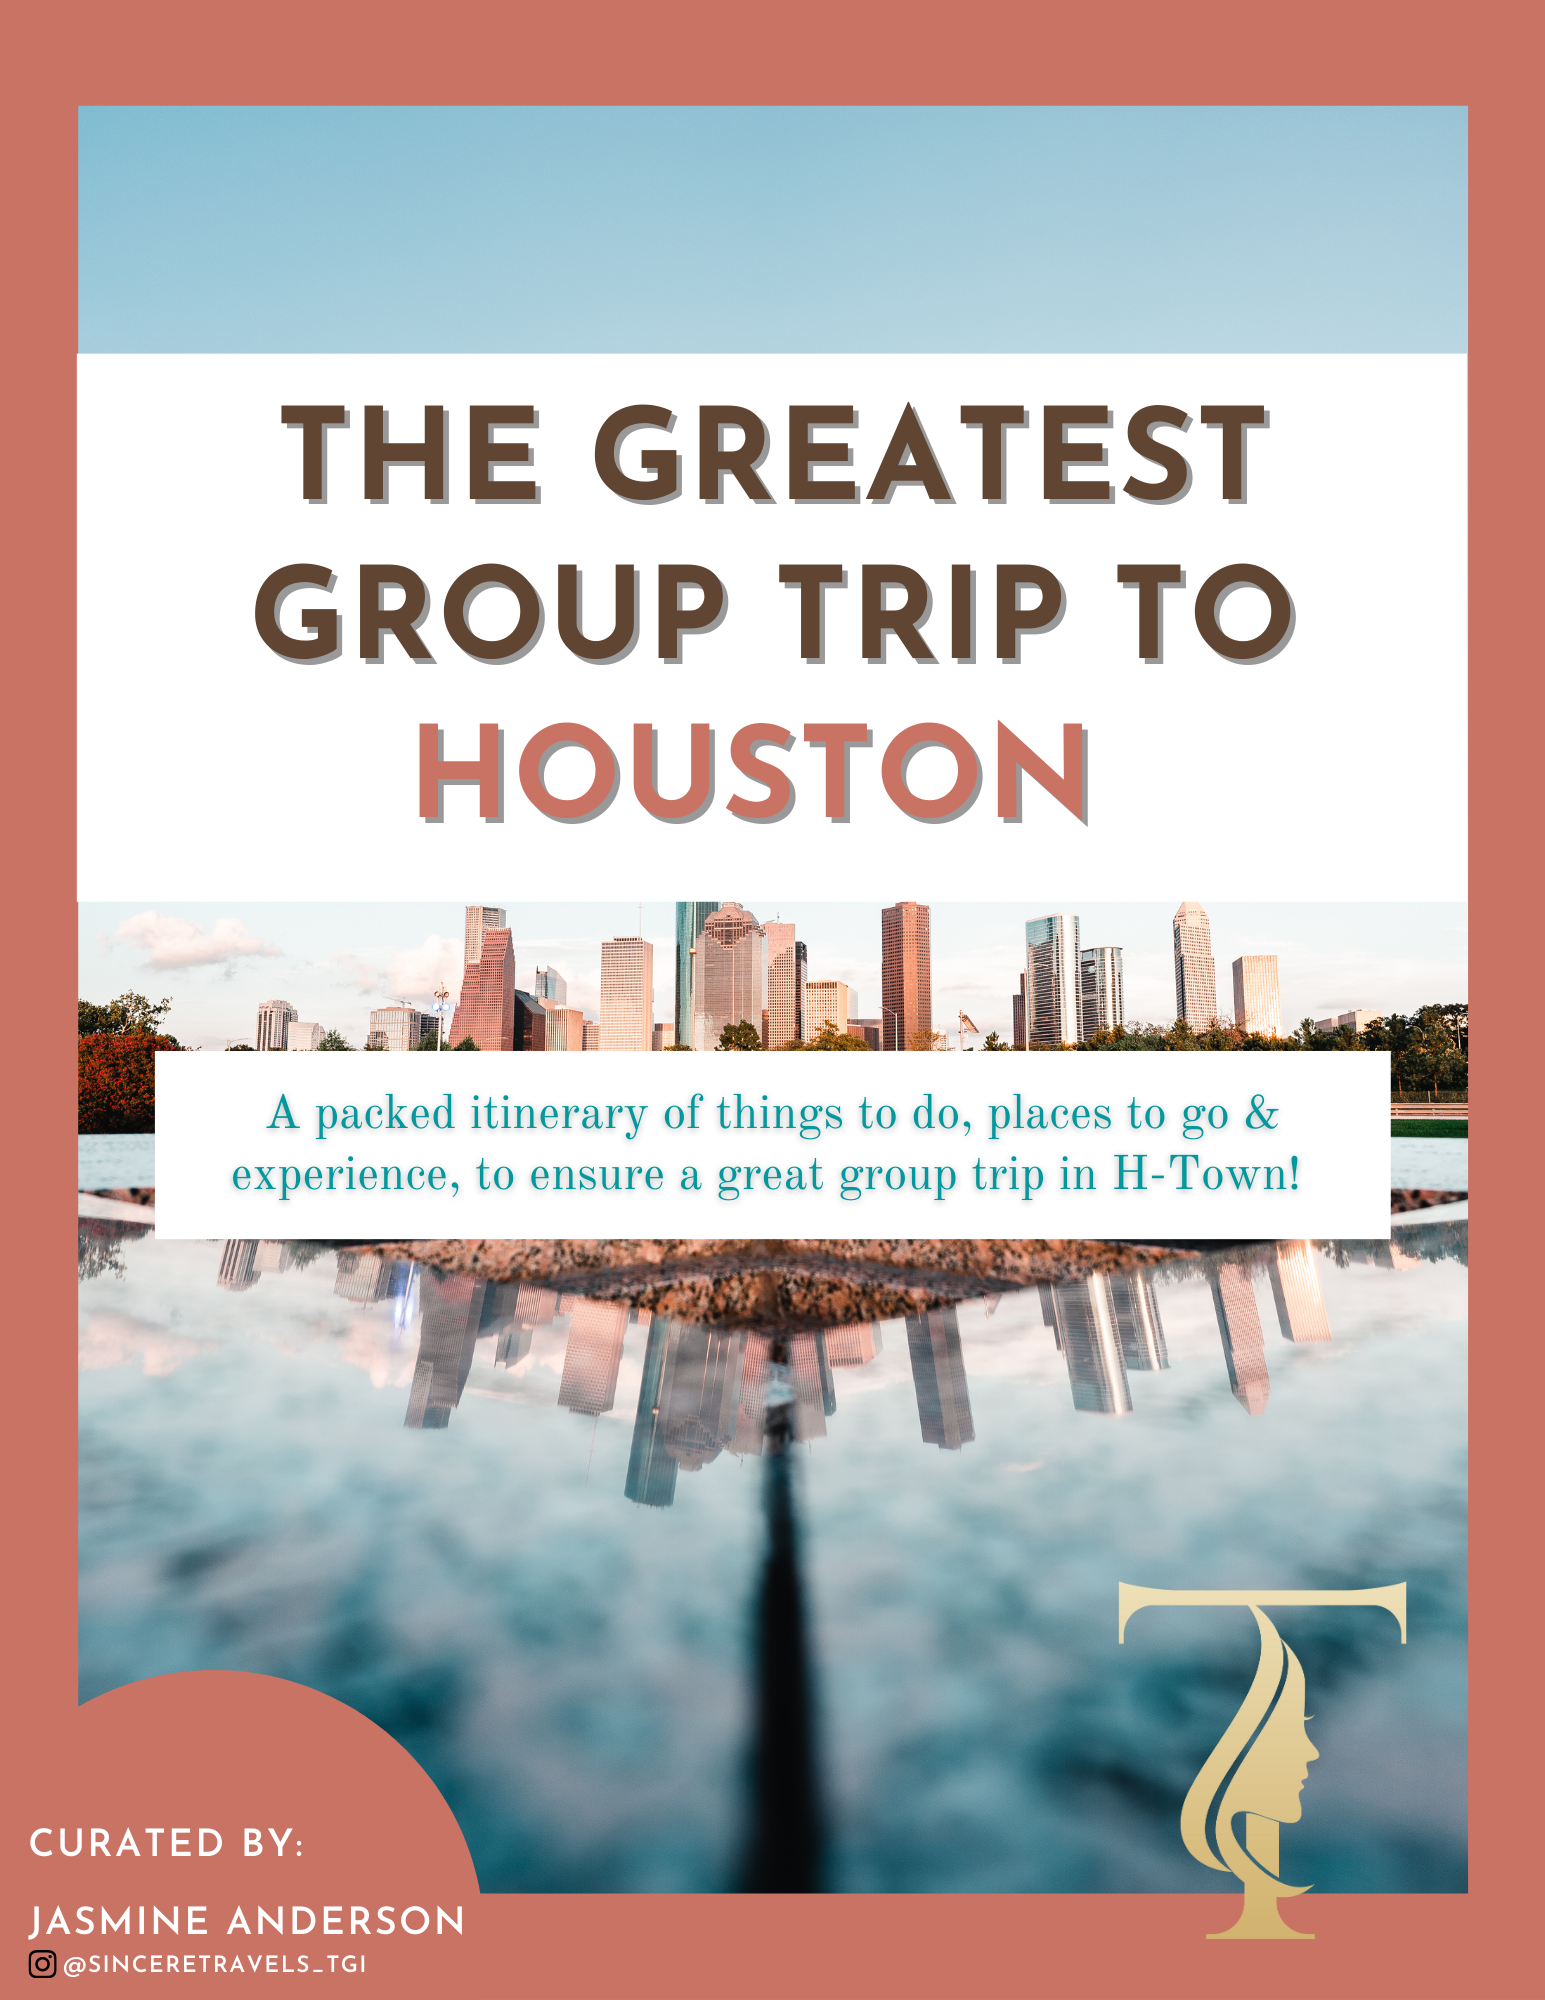 The Greatest Group Trip to Houston  - Itinerary